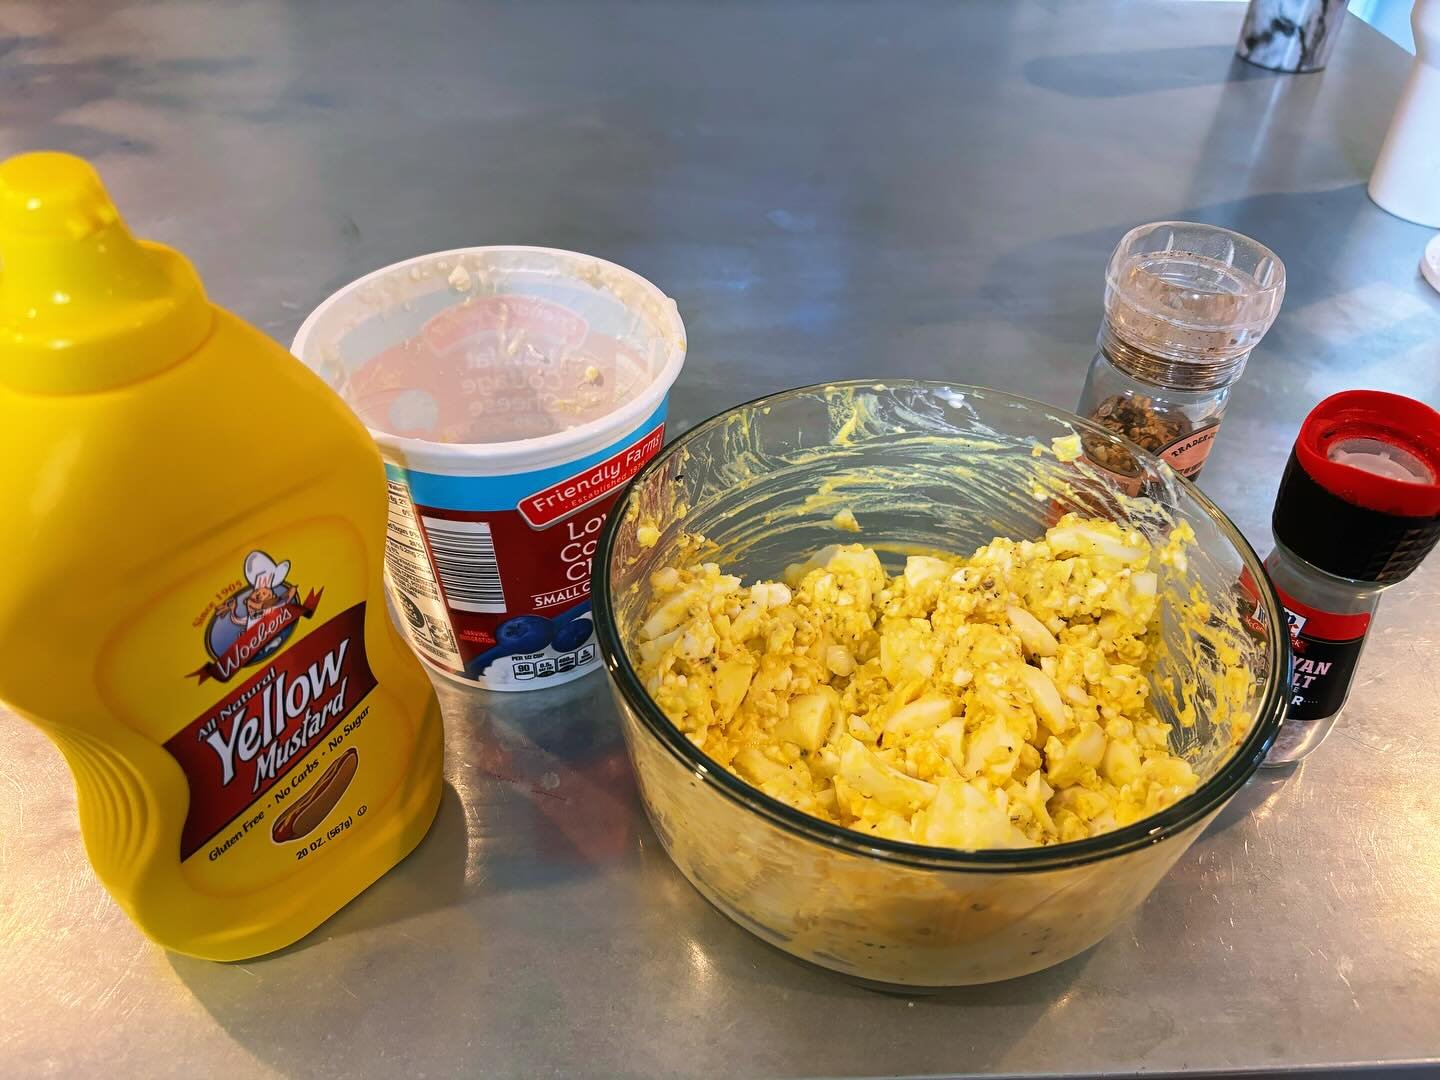 What's for lunch today?! 

High protein egg salad recipe with no mayo! 

🥚 2 hard boiled eggs
🧀 1/2 cup of low fat cottage cheese
💛Mustard
🧂 everything but the bagel seasoning 
😋😋courtesy of Laurie hook @hooked.up_withlaurie